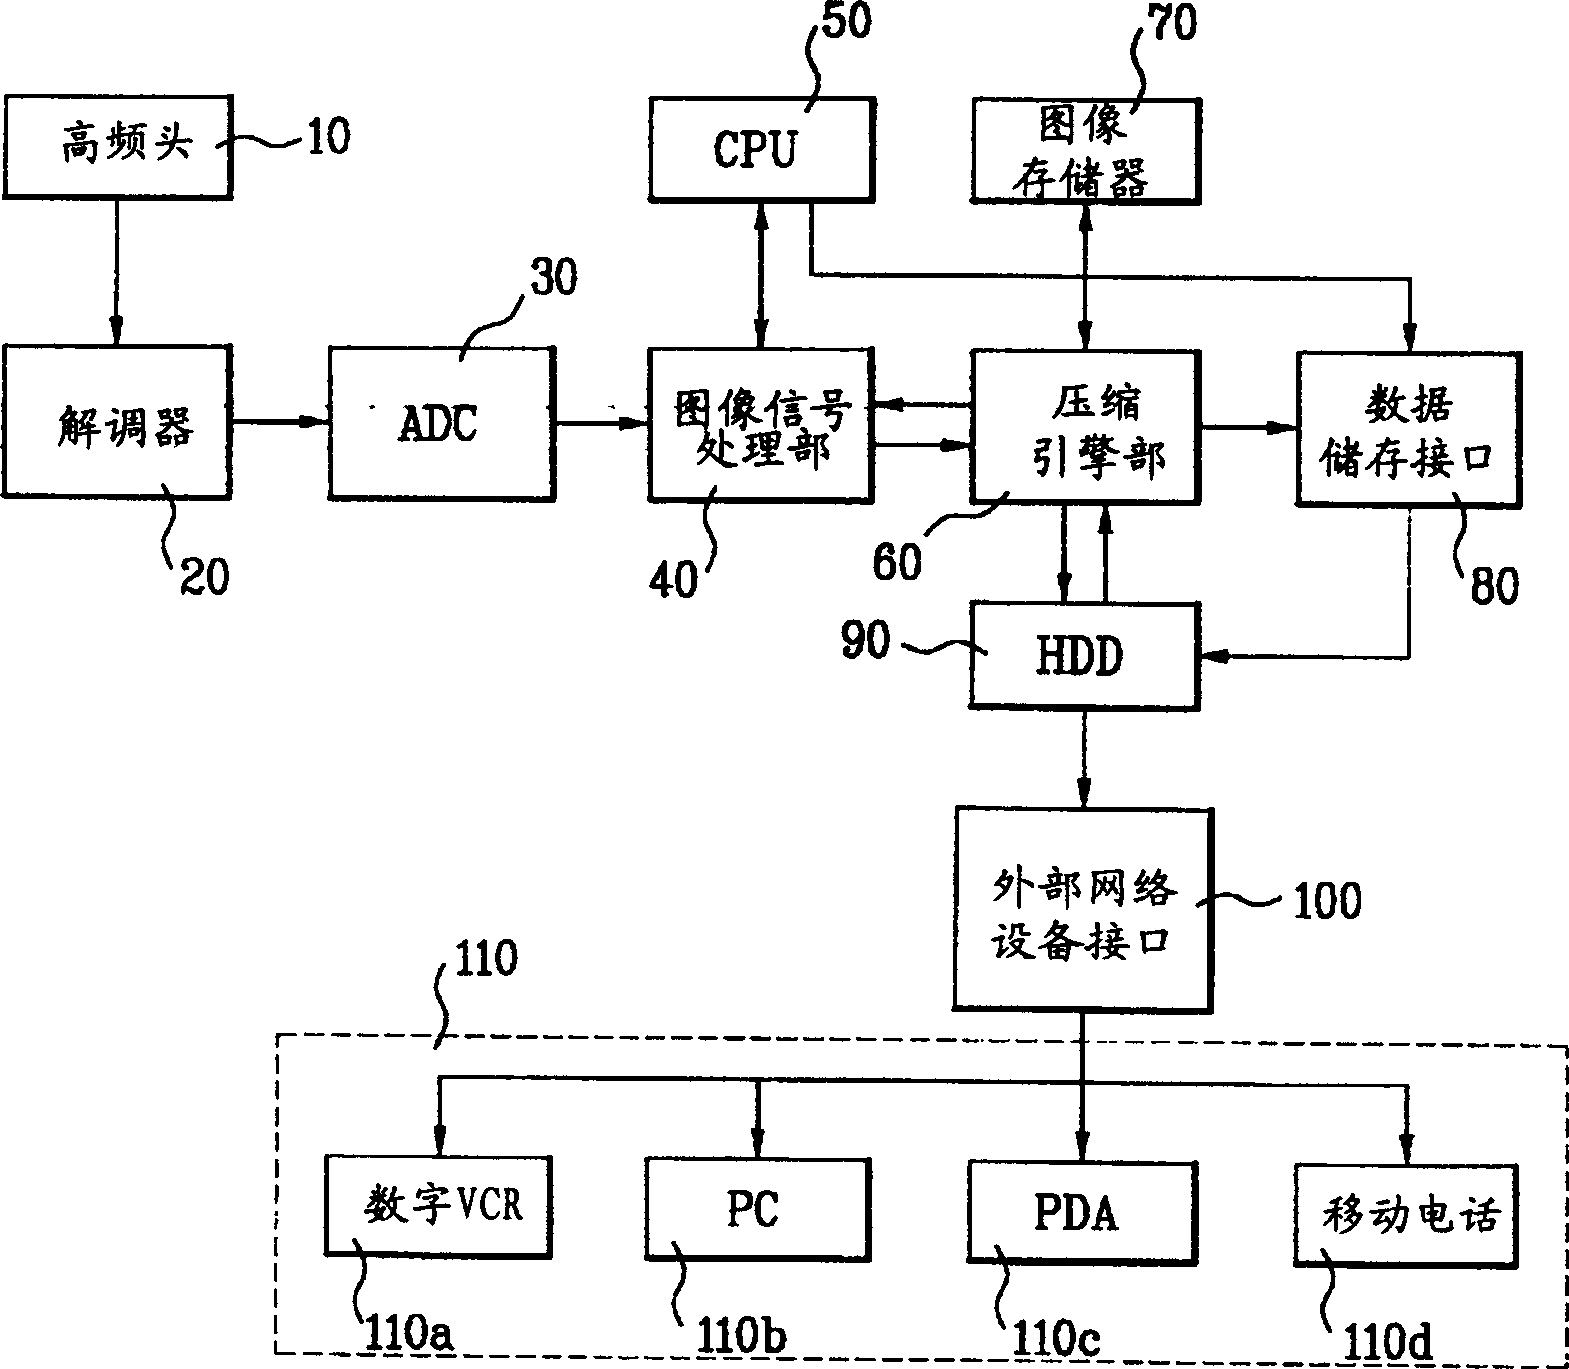 Image signal treatment device of digital television